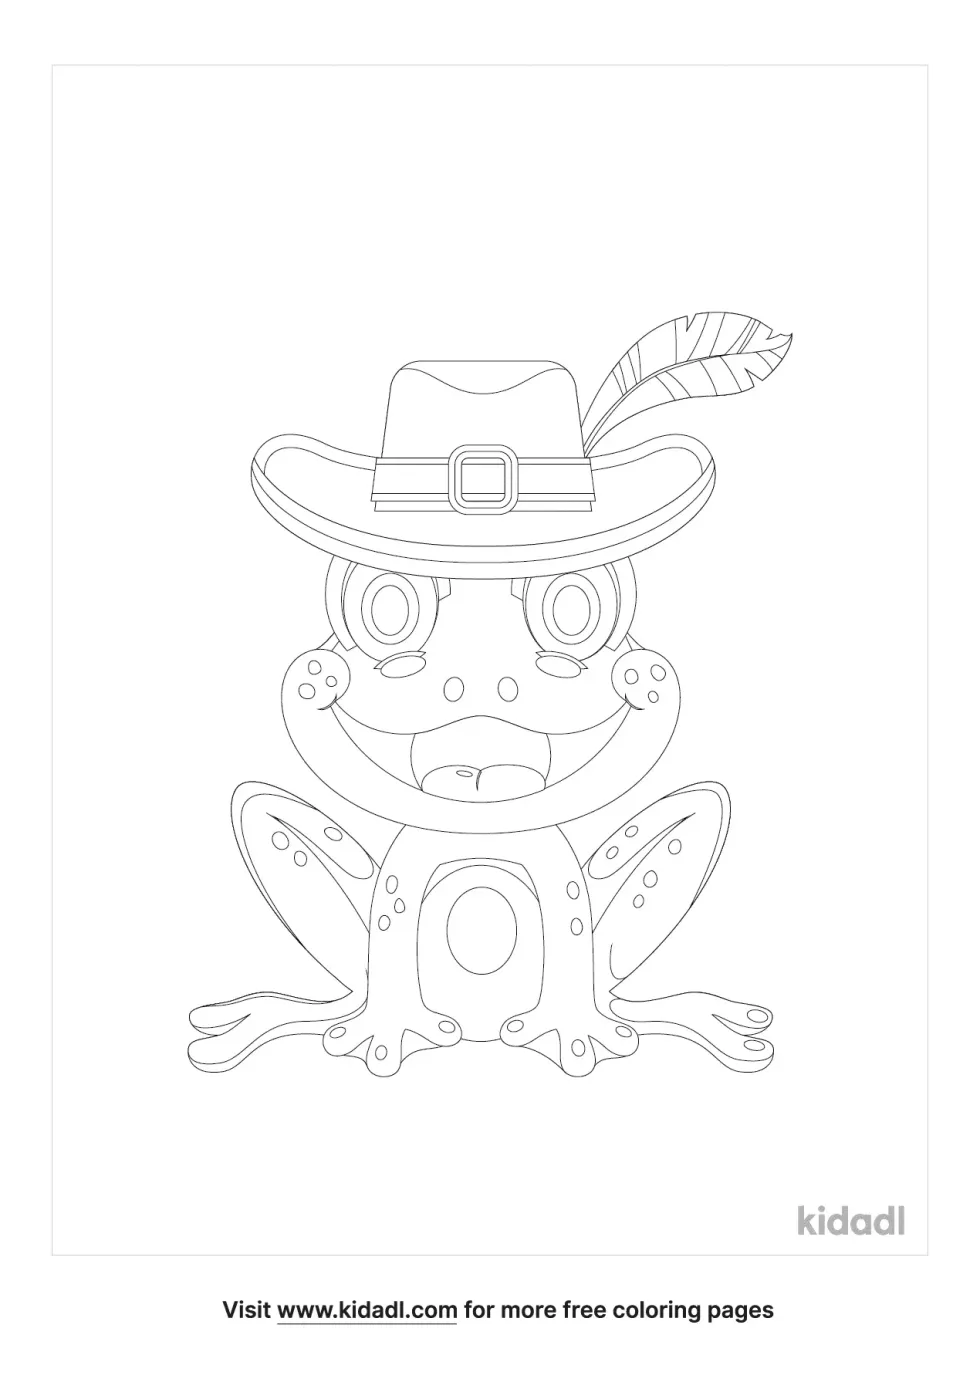 Frog Wearing A Hat Coloring Page